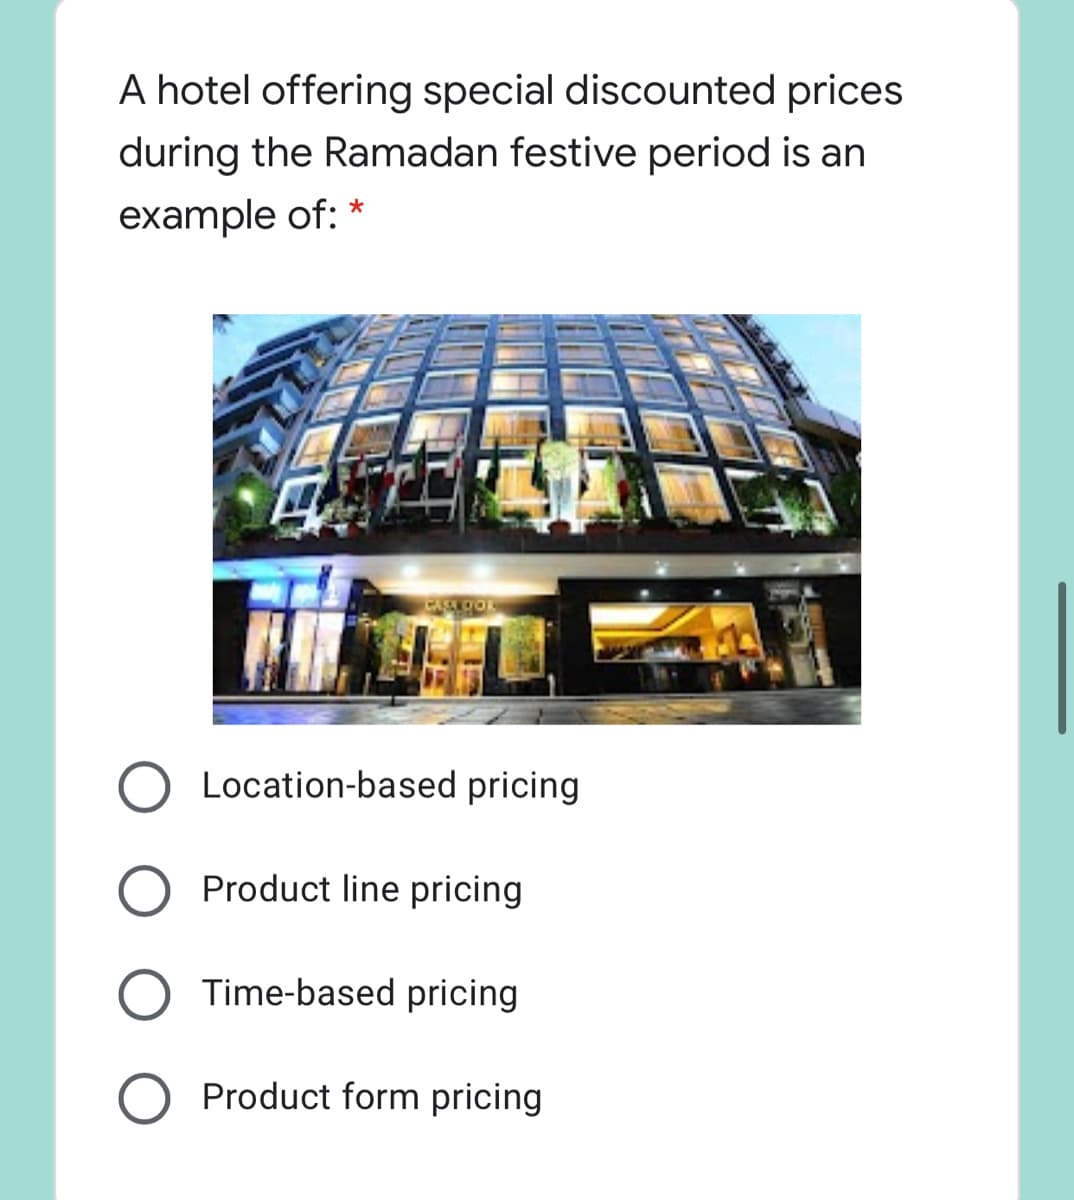 A hotel offering special discounted prices
during the Ramadan festive period is an
example of: *
ASL DOL
Location-based pricing
Product line pricing
O Time-based pricing
Product form pricing
